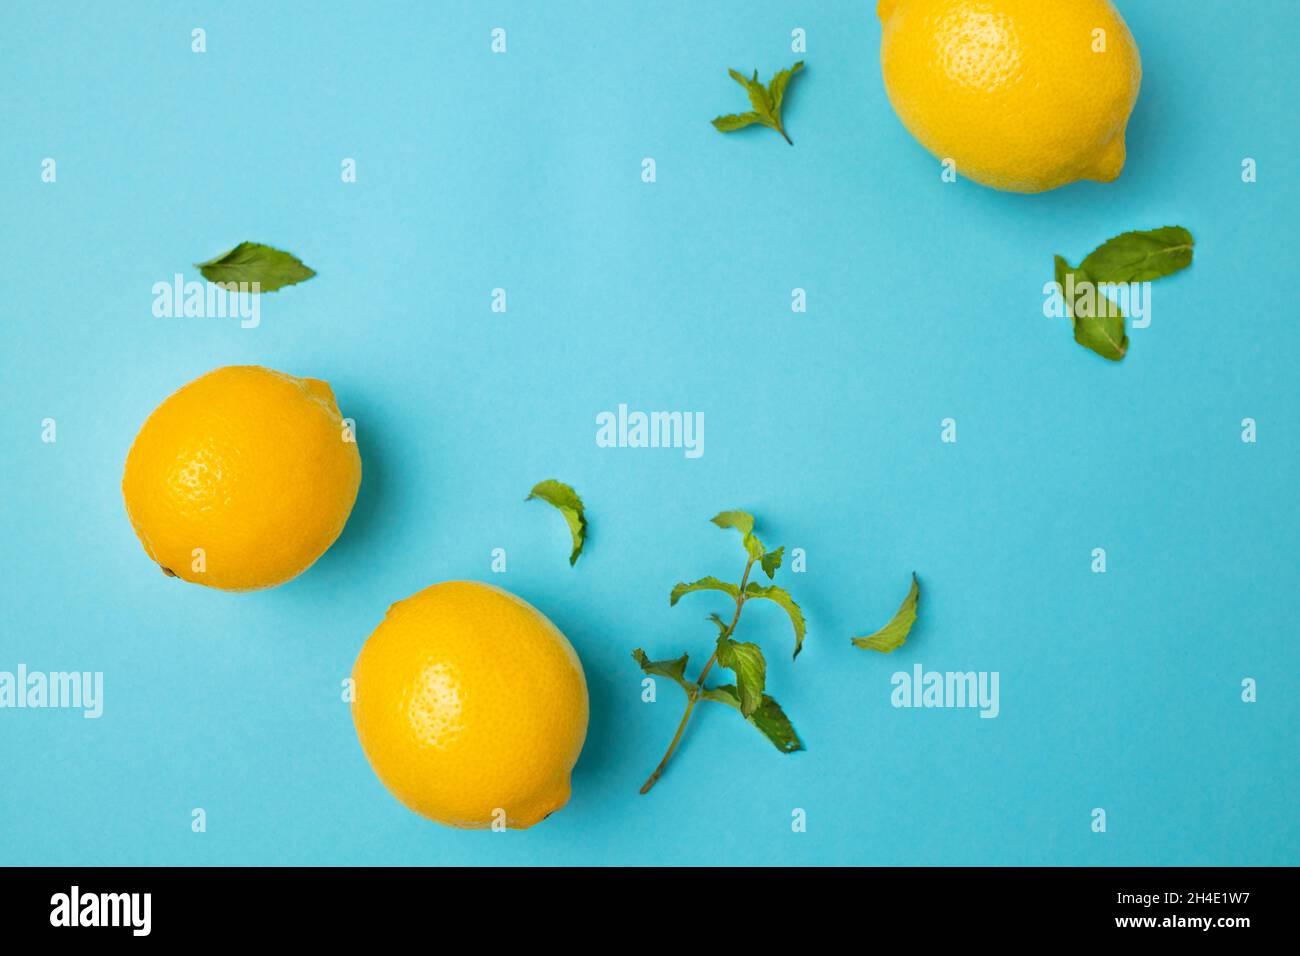 Ripe lemons with mint leaves isolated on bright blue background with copy space for your text. Top view. Flat lay pattern, banner. Frame made of fresh Stock Photo